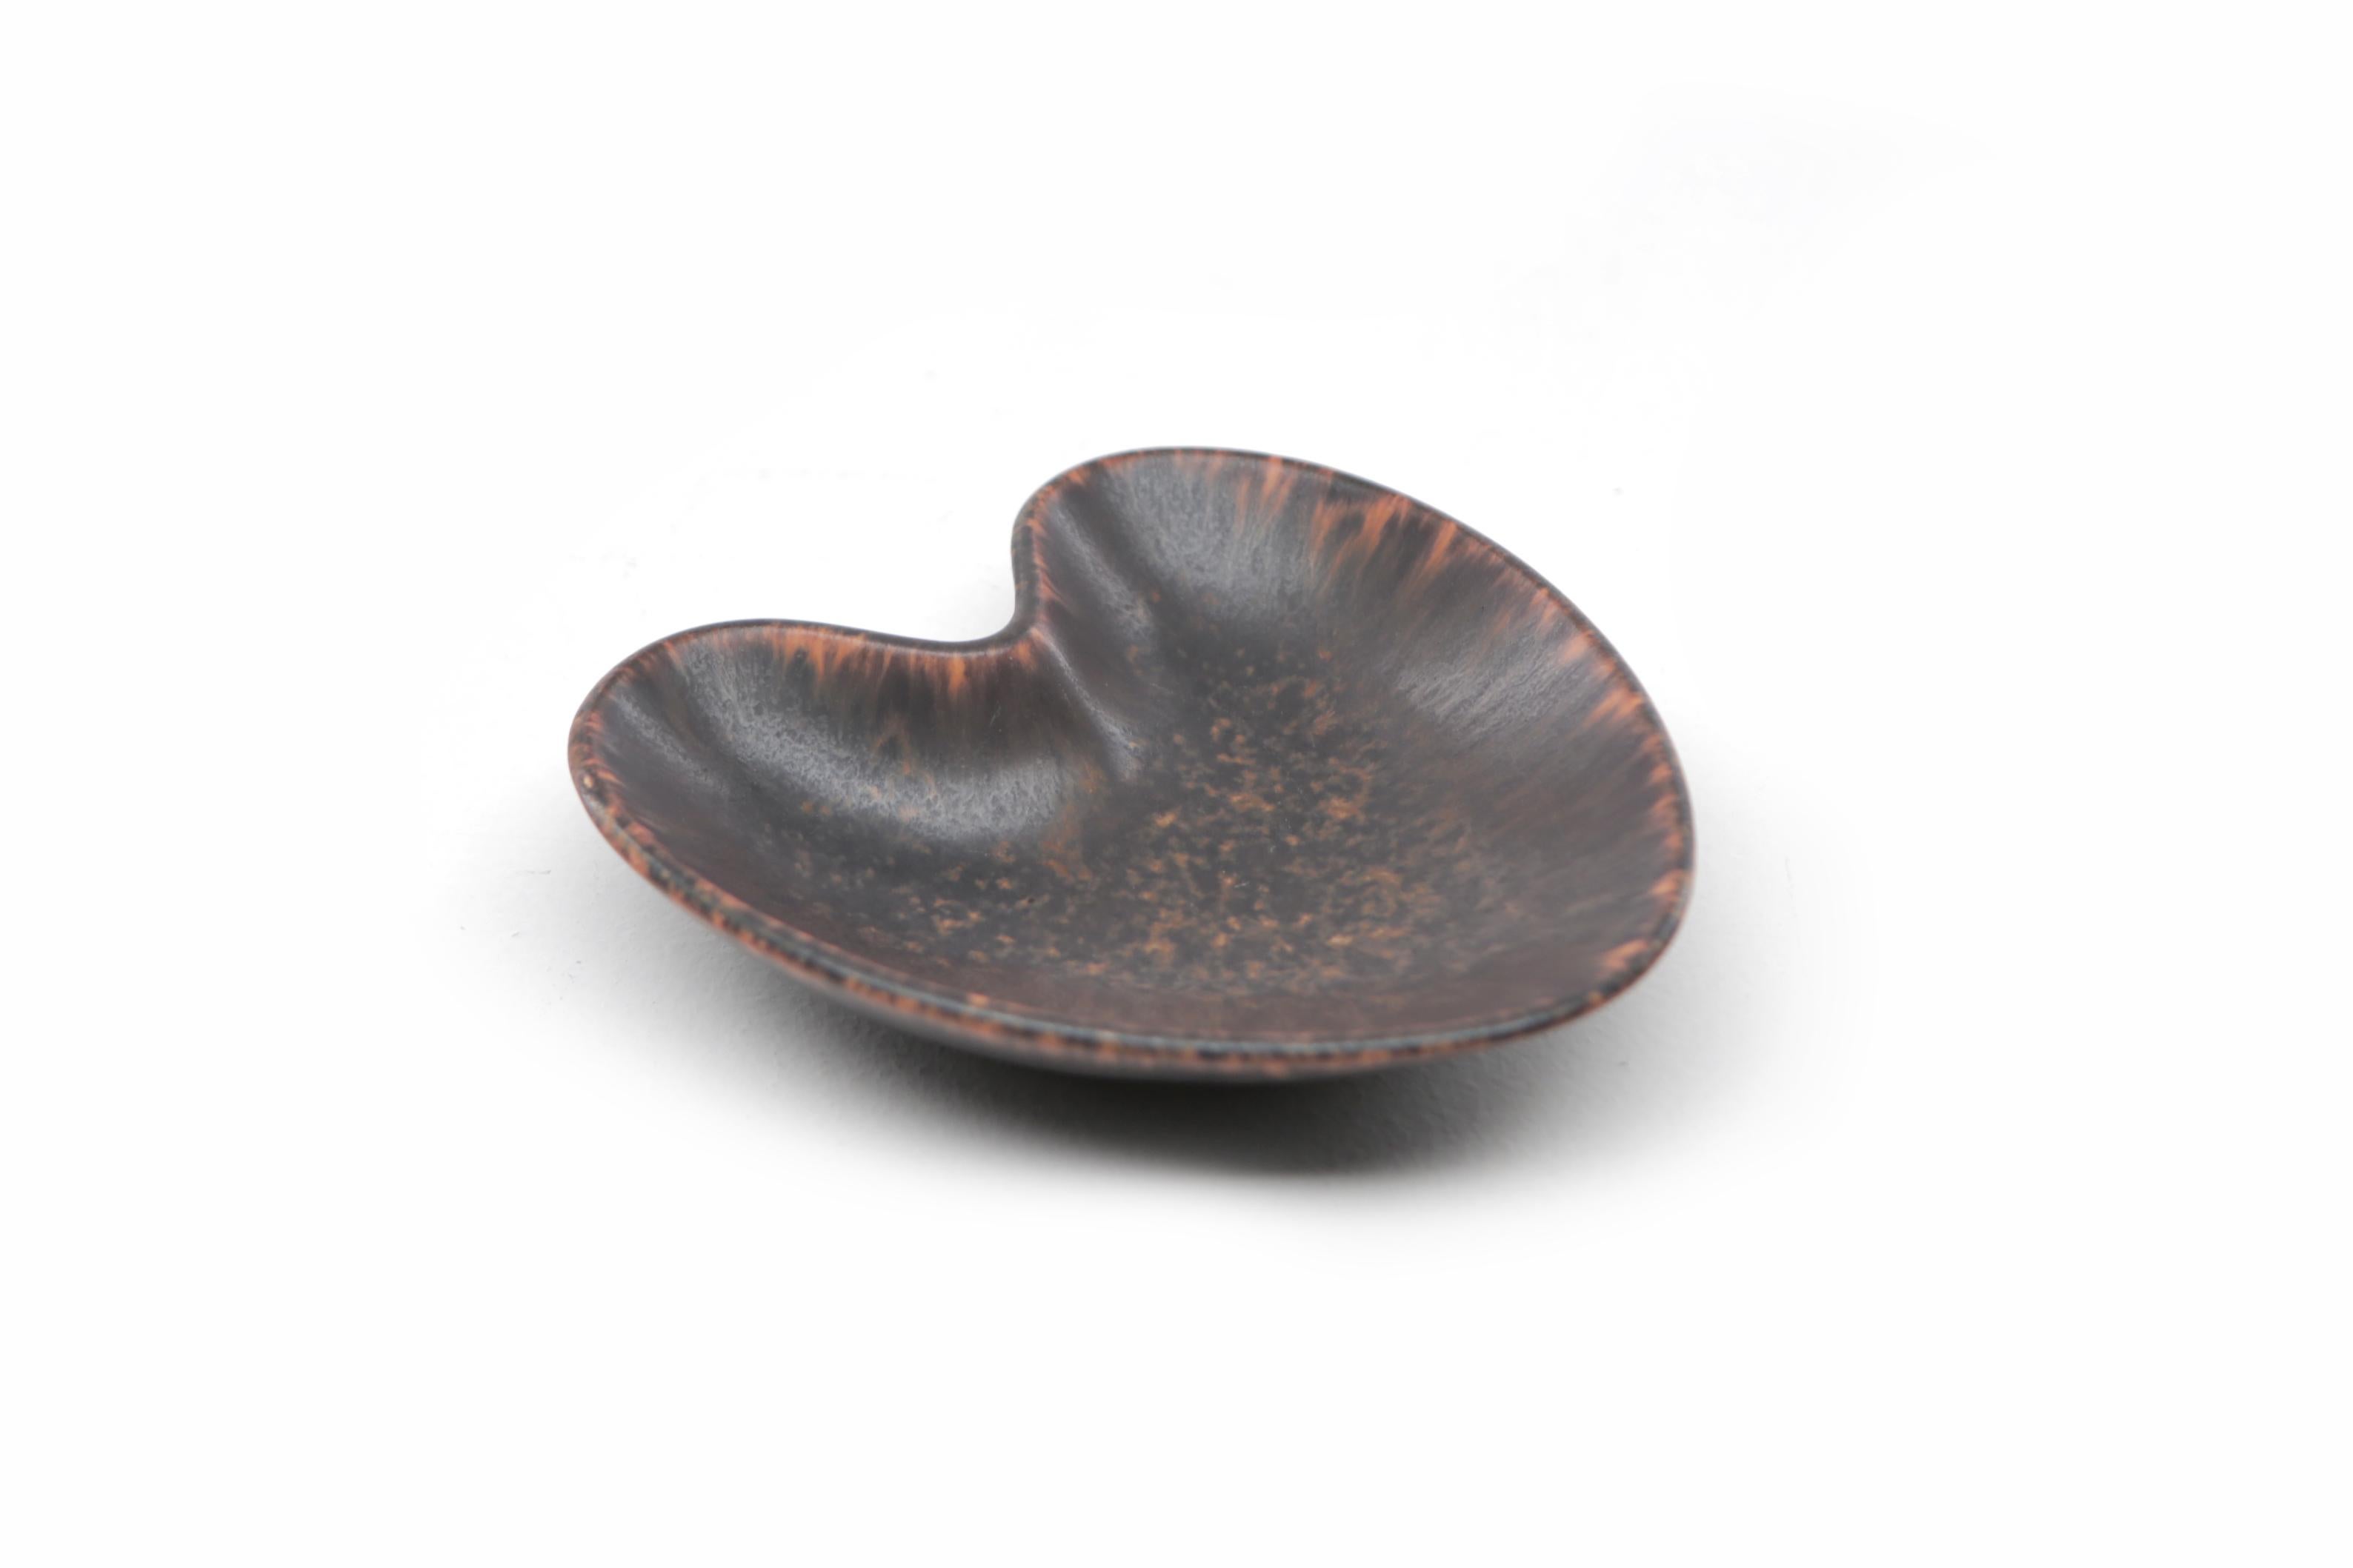 Gunnar Nylund AXA heart shaped brown bowl ochre rim for Rorstrand, Sweden, 1960s.

Measures: Length 13 cm
Width 11 cm
Height 5 cm

Incised 